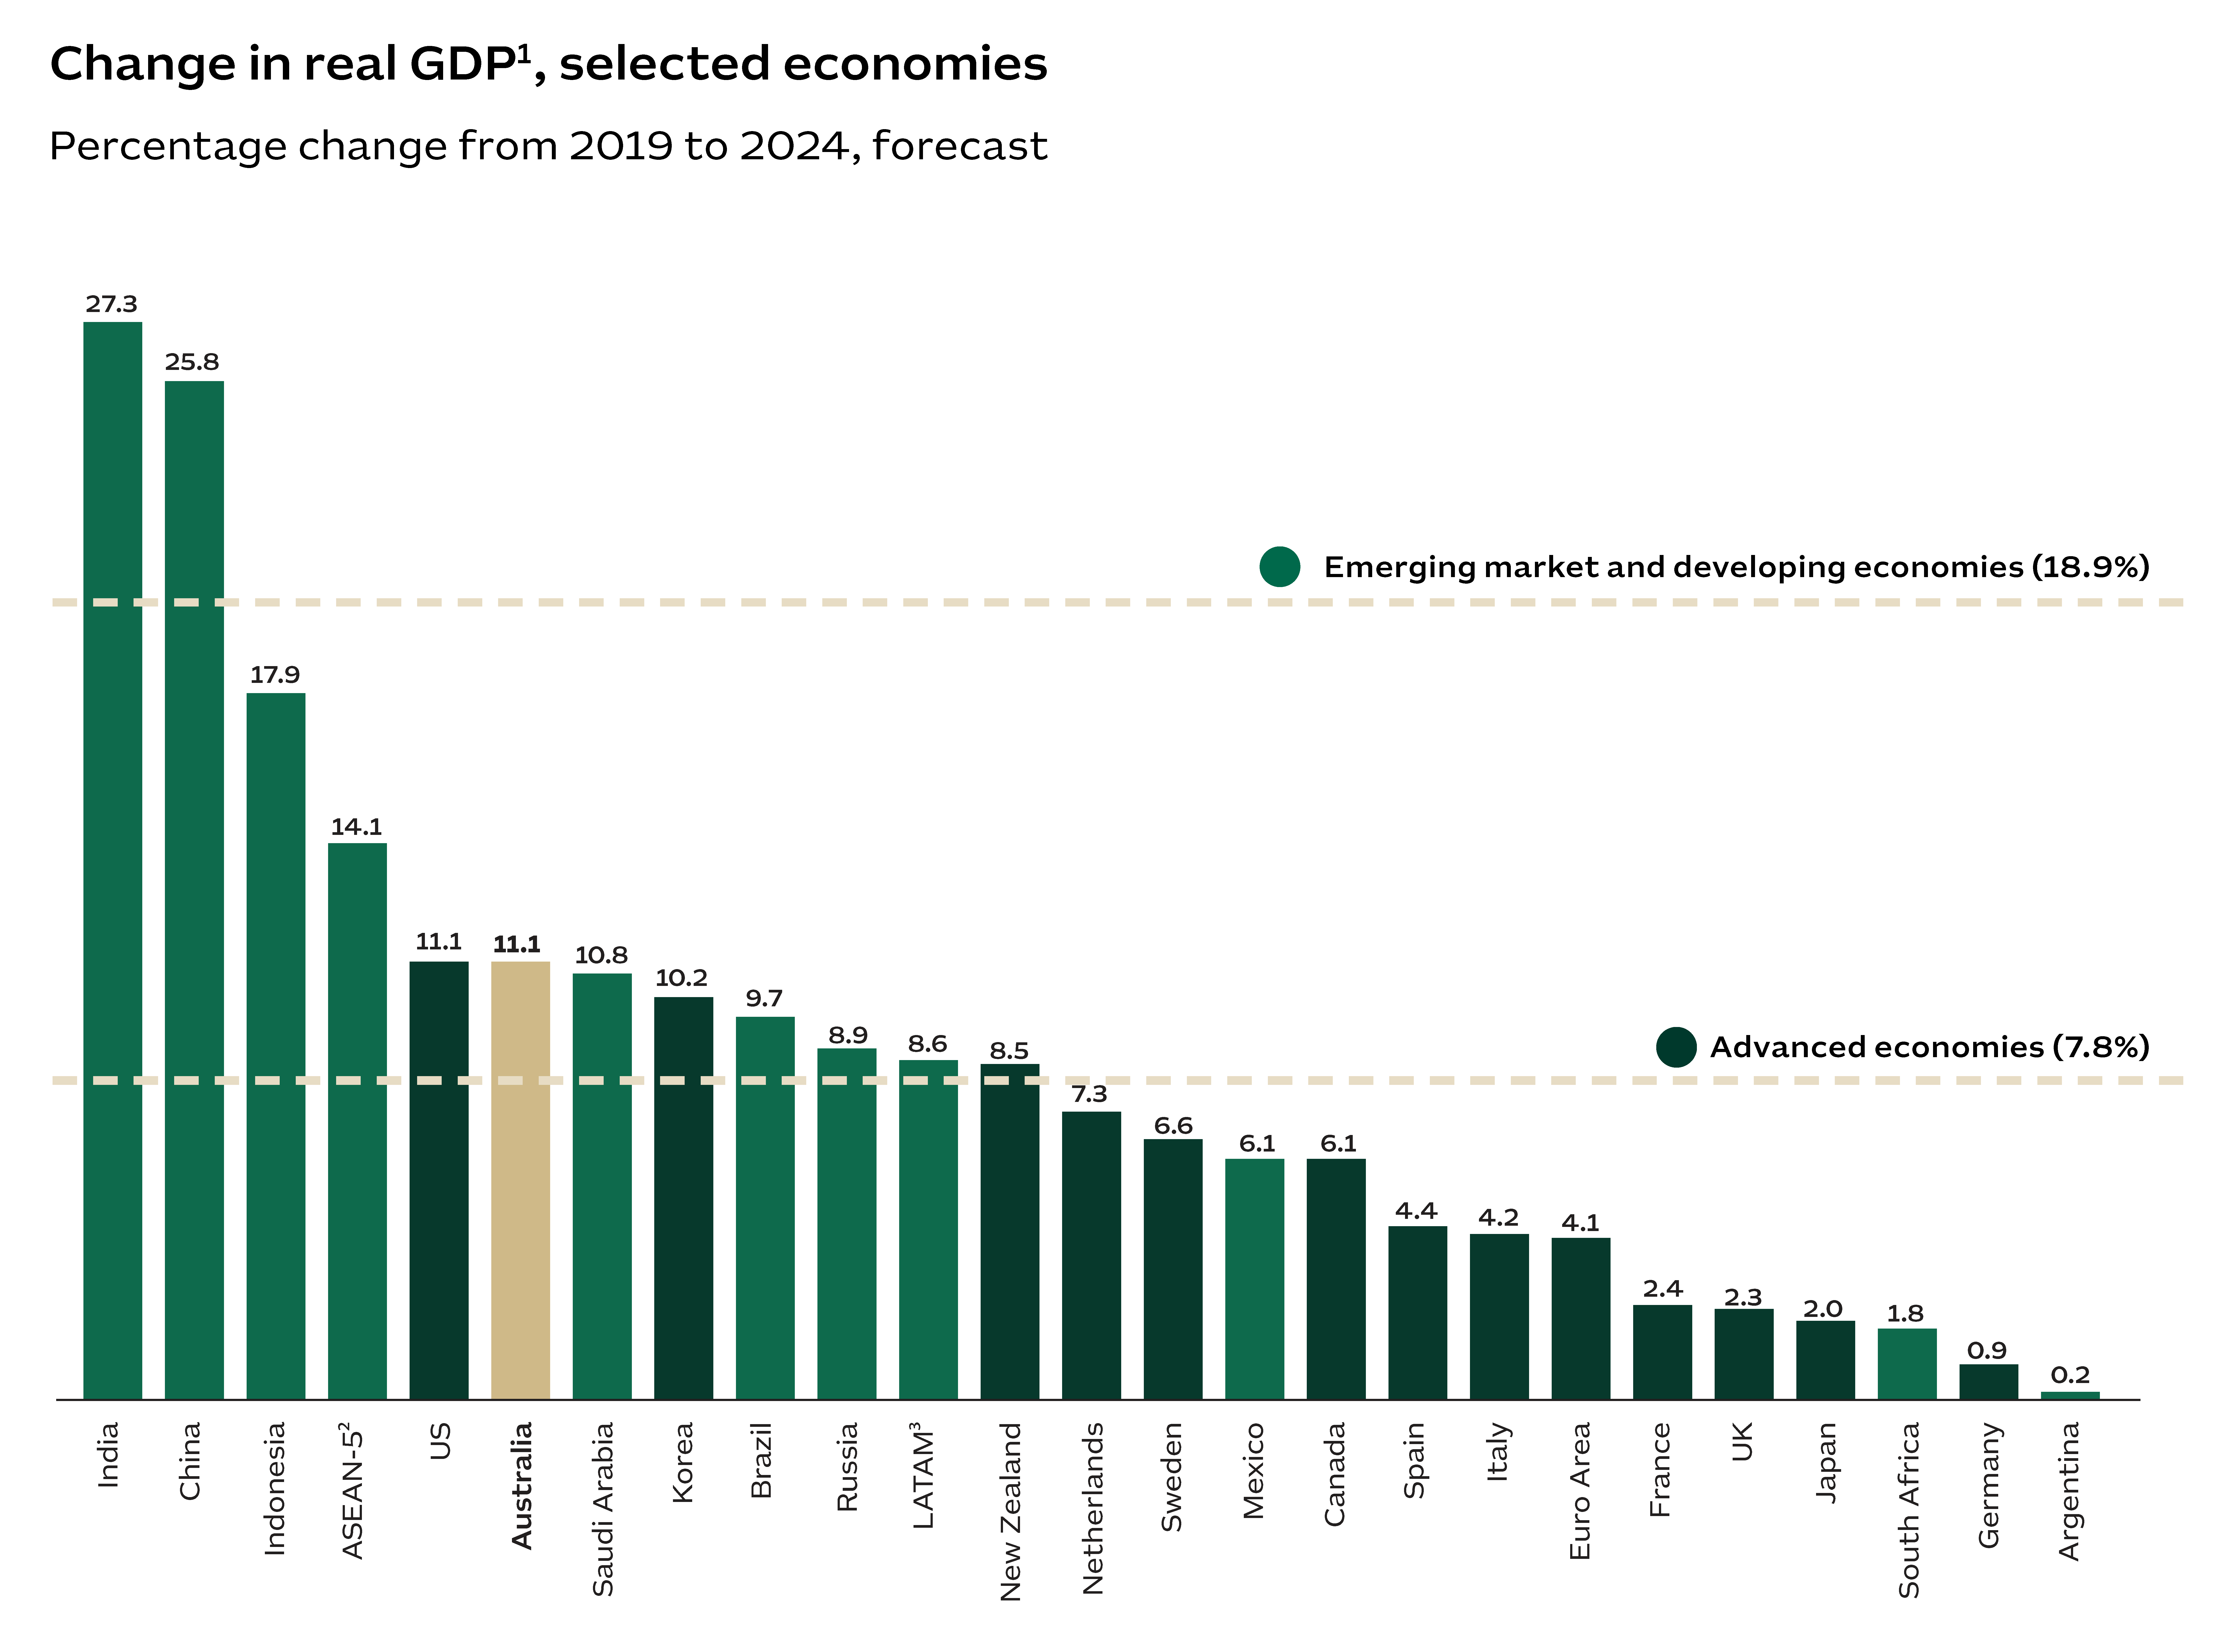 The graph shows the estimated percentage change in real gross domestic product (GDP) for selected economies from 2019 to 2024. The selected economies are: Emerging markets and developing economies (18.9%); advanced economies (7.8%); India 27.3%; China 25.8%; Indonesia 17.9%; Association of Southeast Asian Nations 14.1%; US 11.1%; Australia 11.1%; Saudi Arabia 10.8%; Korea 10.2%; Brazil 9.7%; Russia 8.9%; Latin America and the Caribbean 8.6%; New Zealand 8.5%; Netherlands 7.3%; Sweden 6.6%; Mexico 6.1%; Canada 6.1%; Spain 4.4%; Italy 4.2%; Euro Area 4.1%; France 2.4%; UK 2.3%; Japan 2.0%; South Africa 1.8%; Germany 0.9%; and Argentina 0.2%.